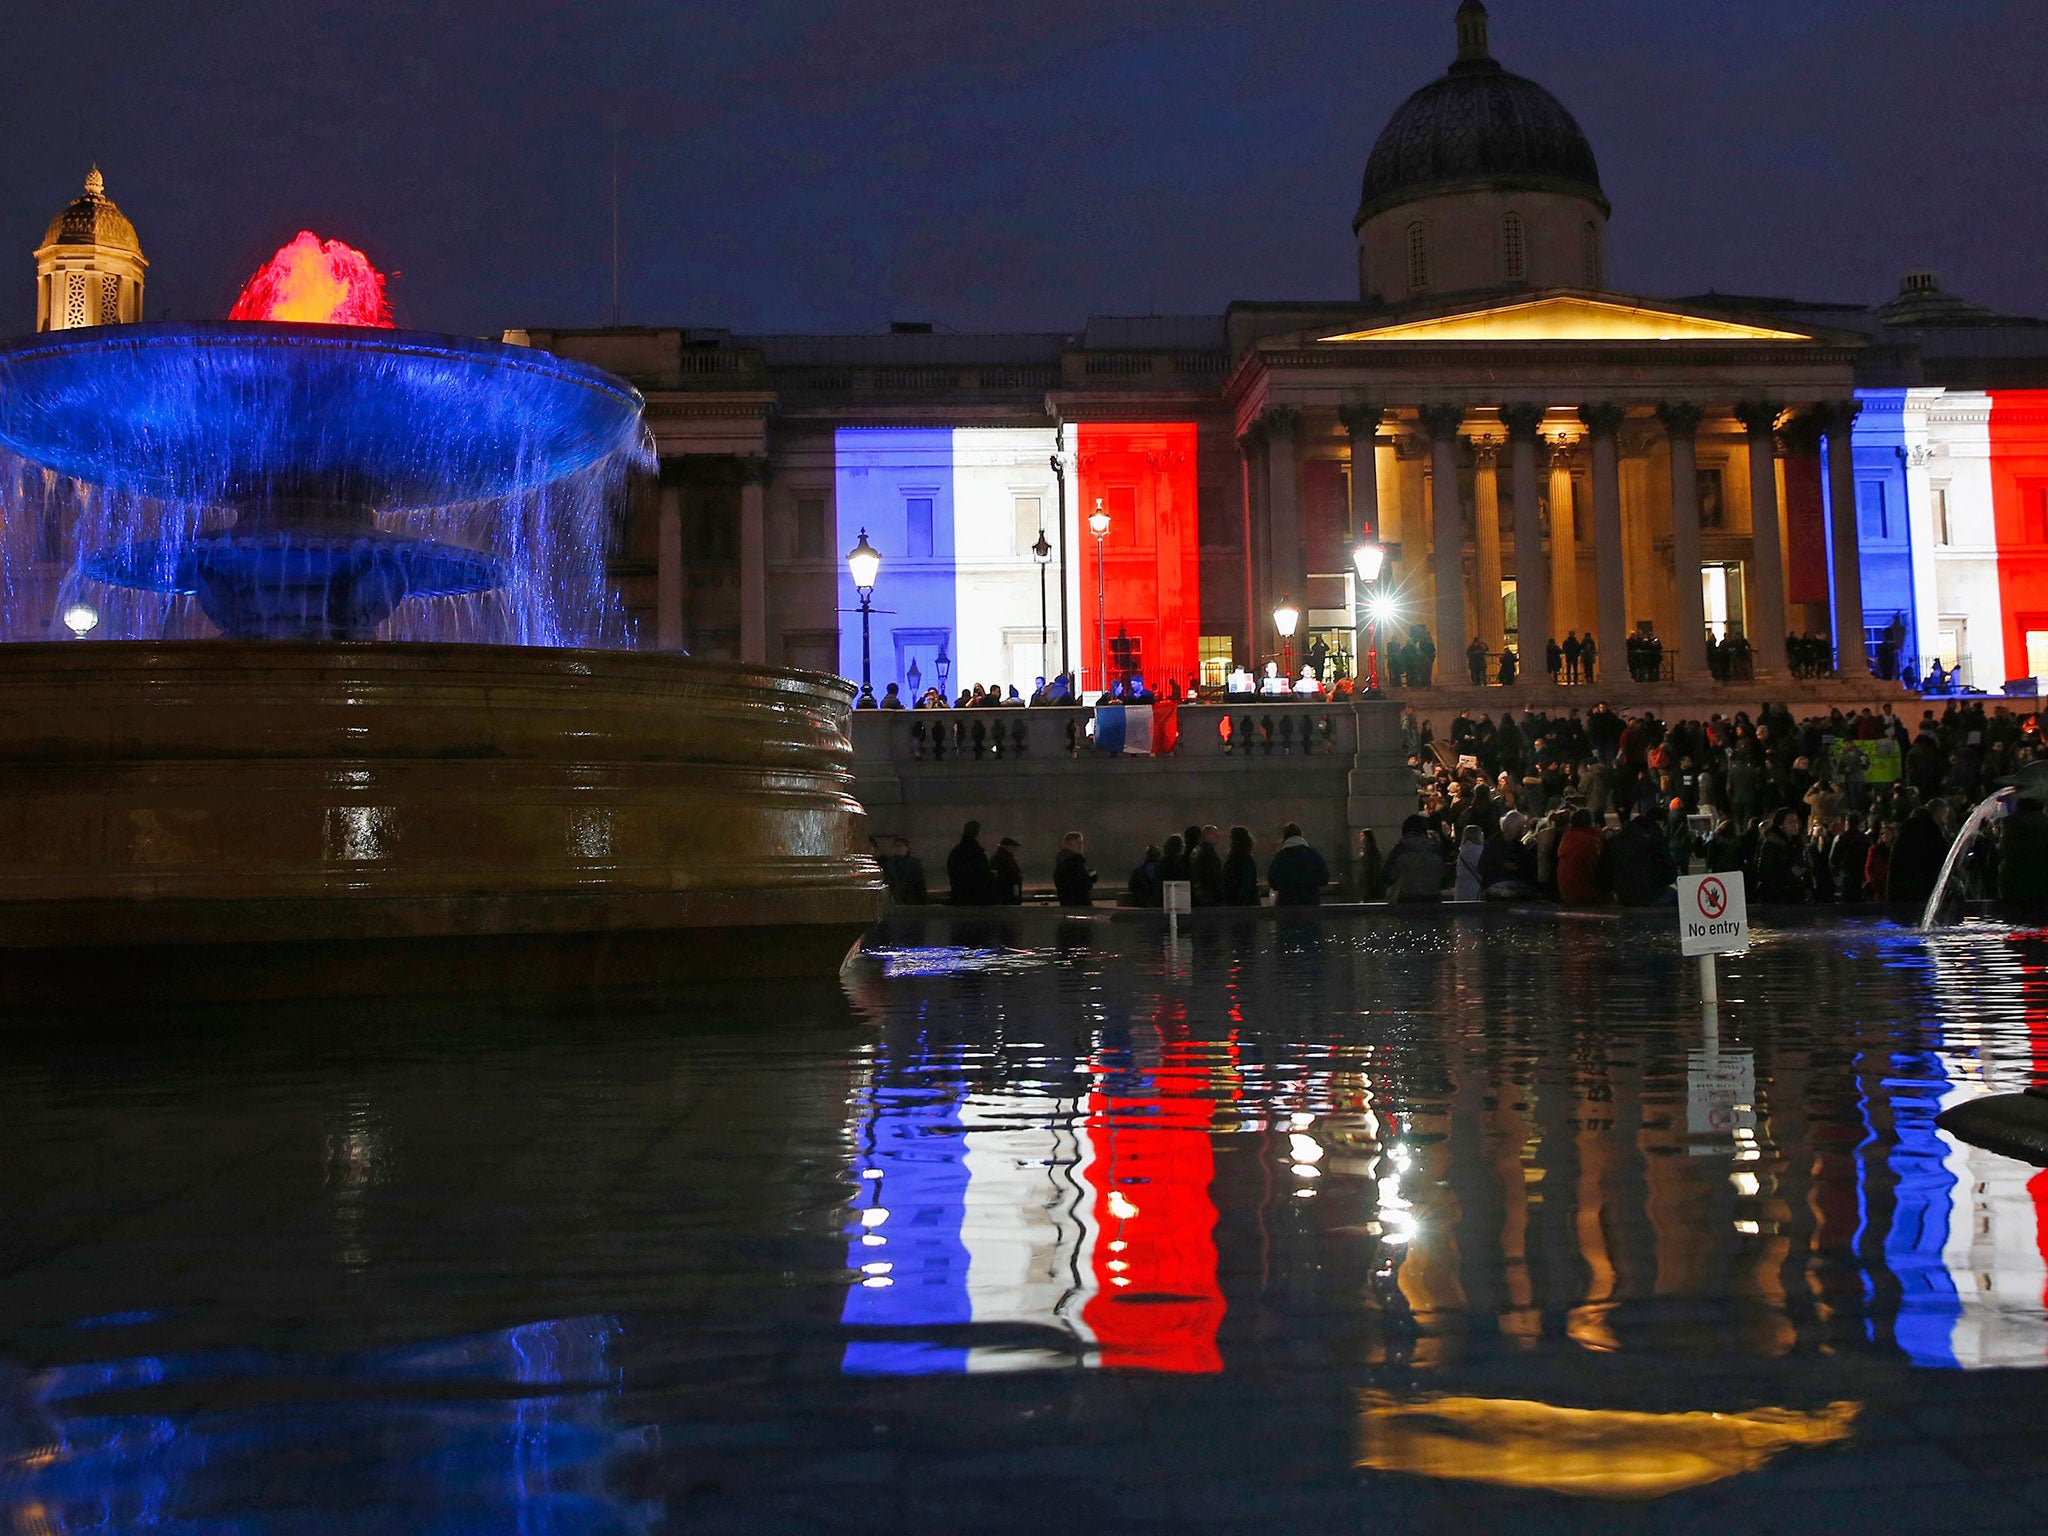 The colours of the French national flag are reflected in the fountains of Trafalgar Square as they are projected in tribute to the Paris terror attacks, on the The National Gallery in London